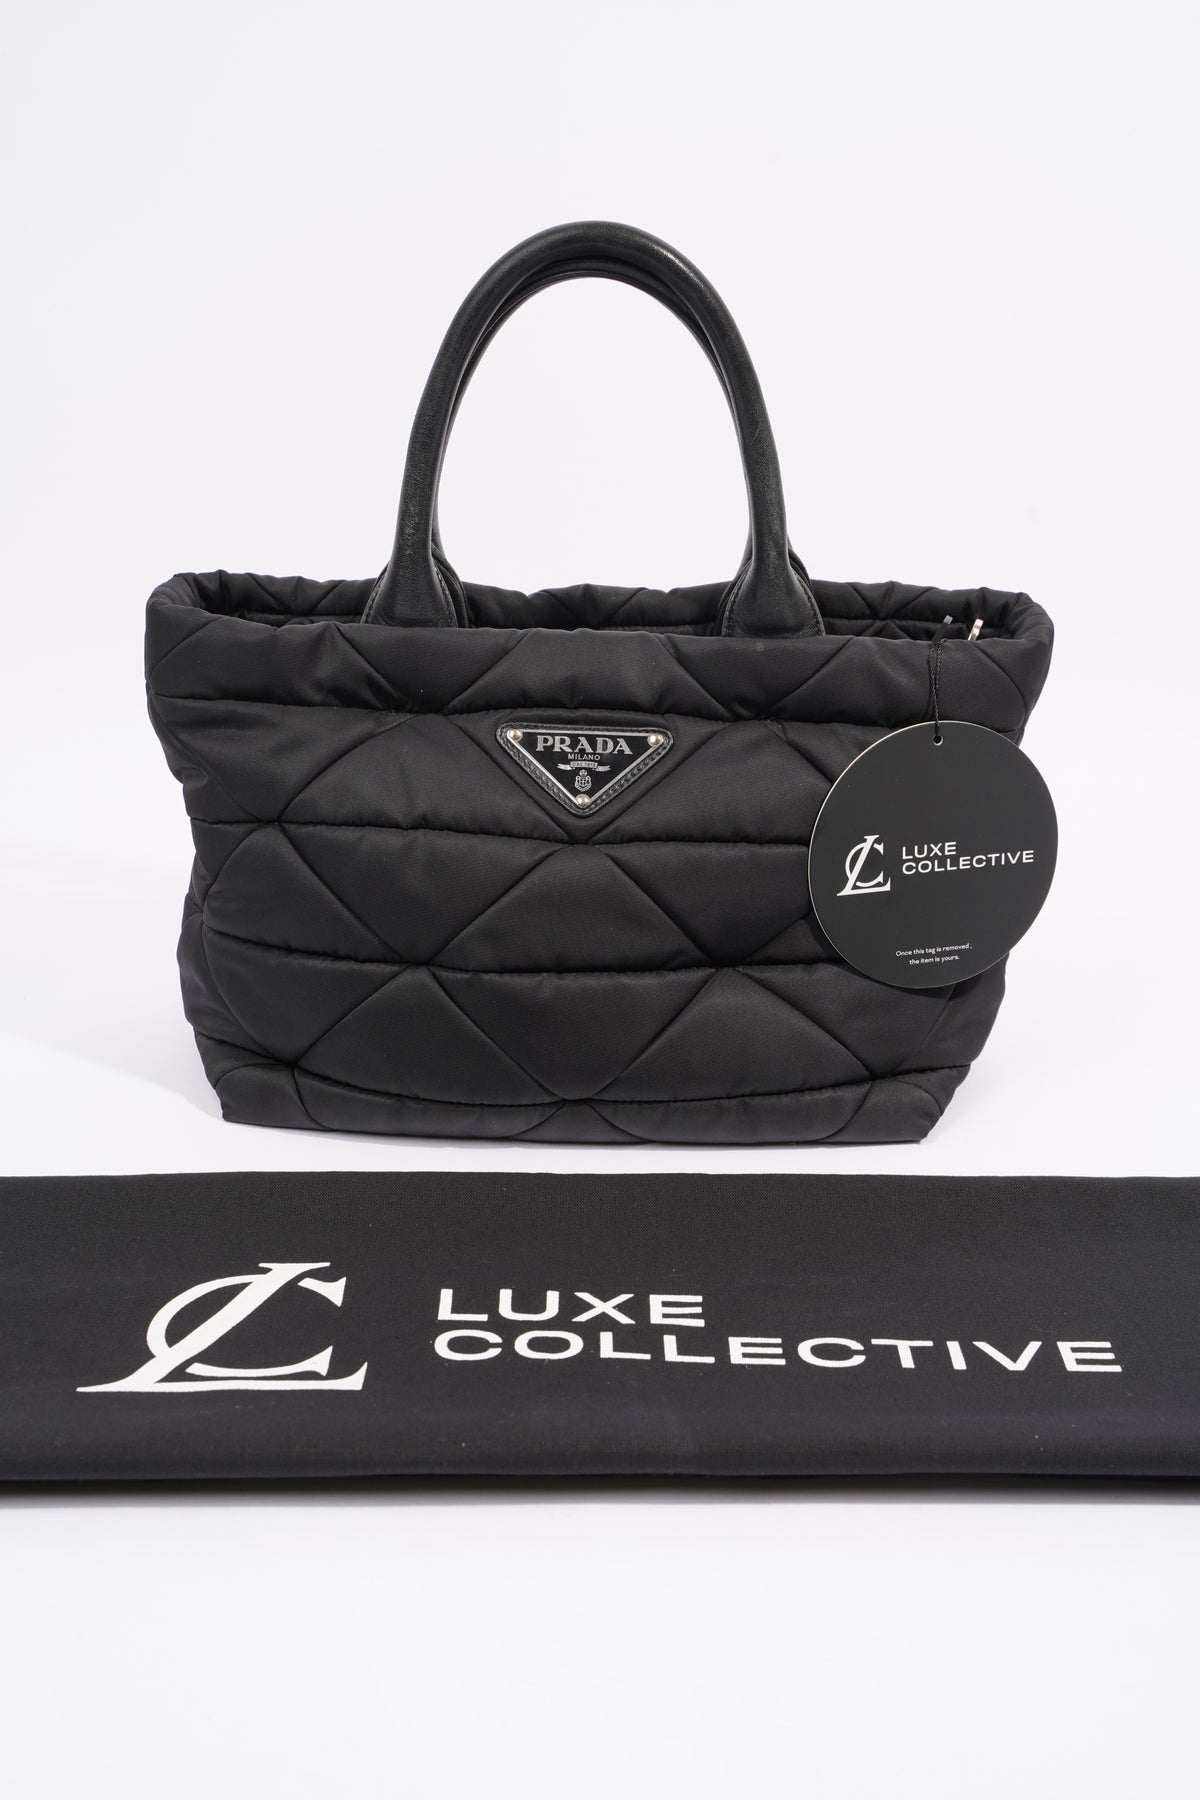 Sell To Luxe Collective